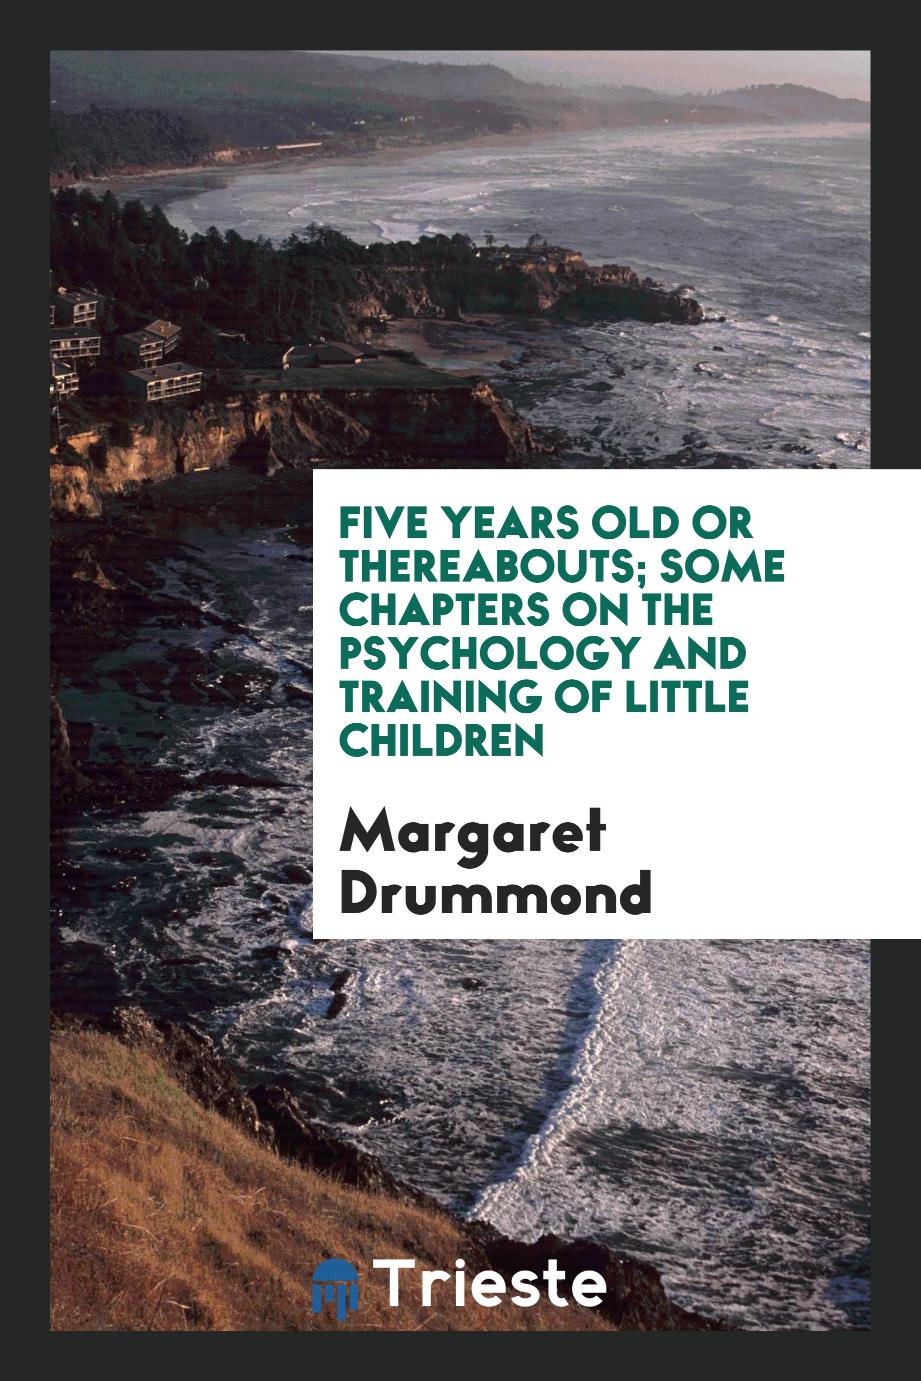 Five years old or thereabouts; some chapters on the psychology and training of little children